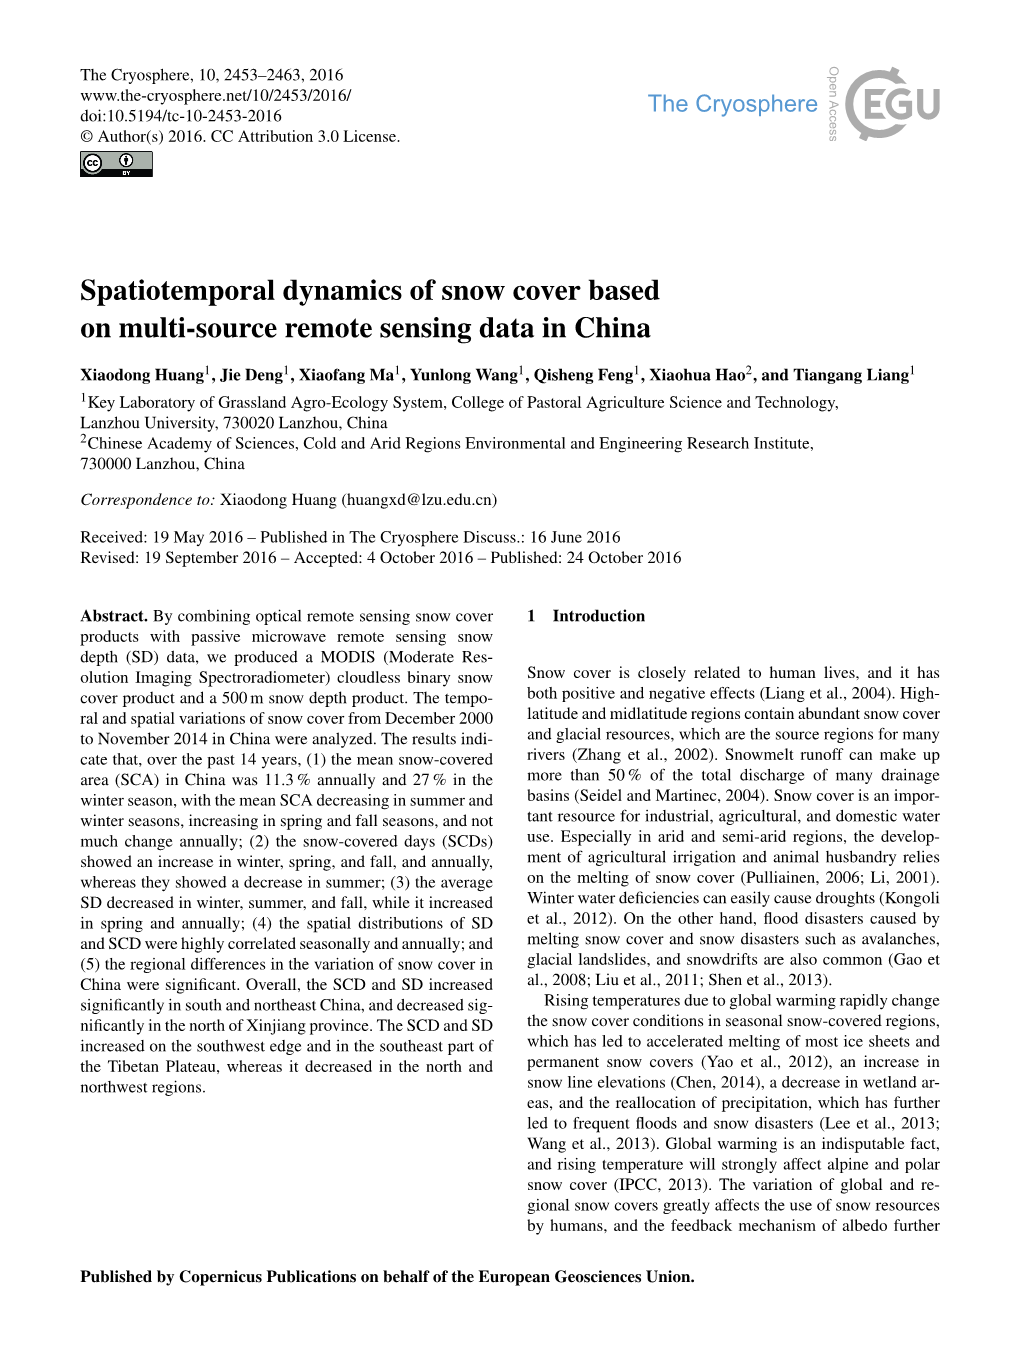 Spatiotemporal Dynamics of Snow Cover Based on Multi-Source Remote Sensing Data in China